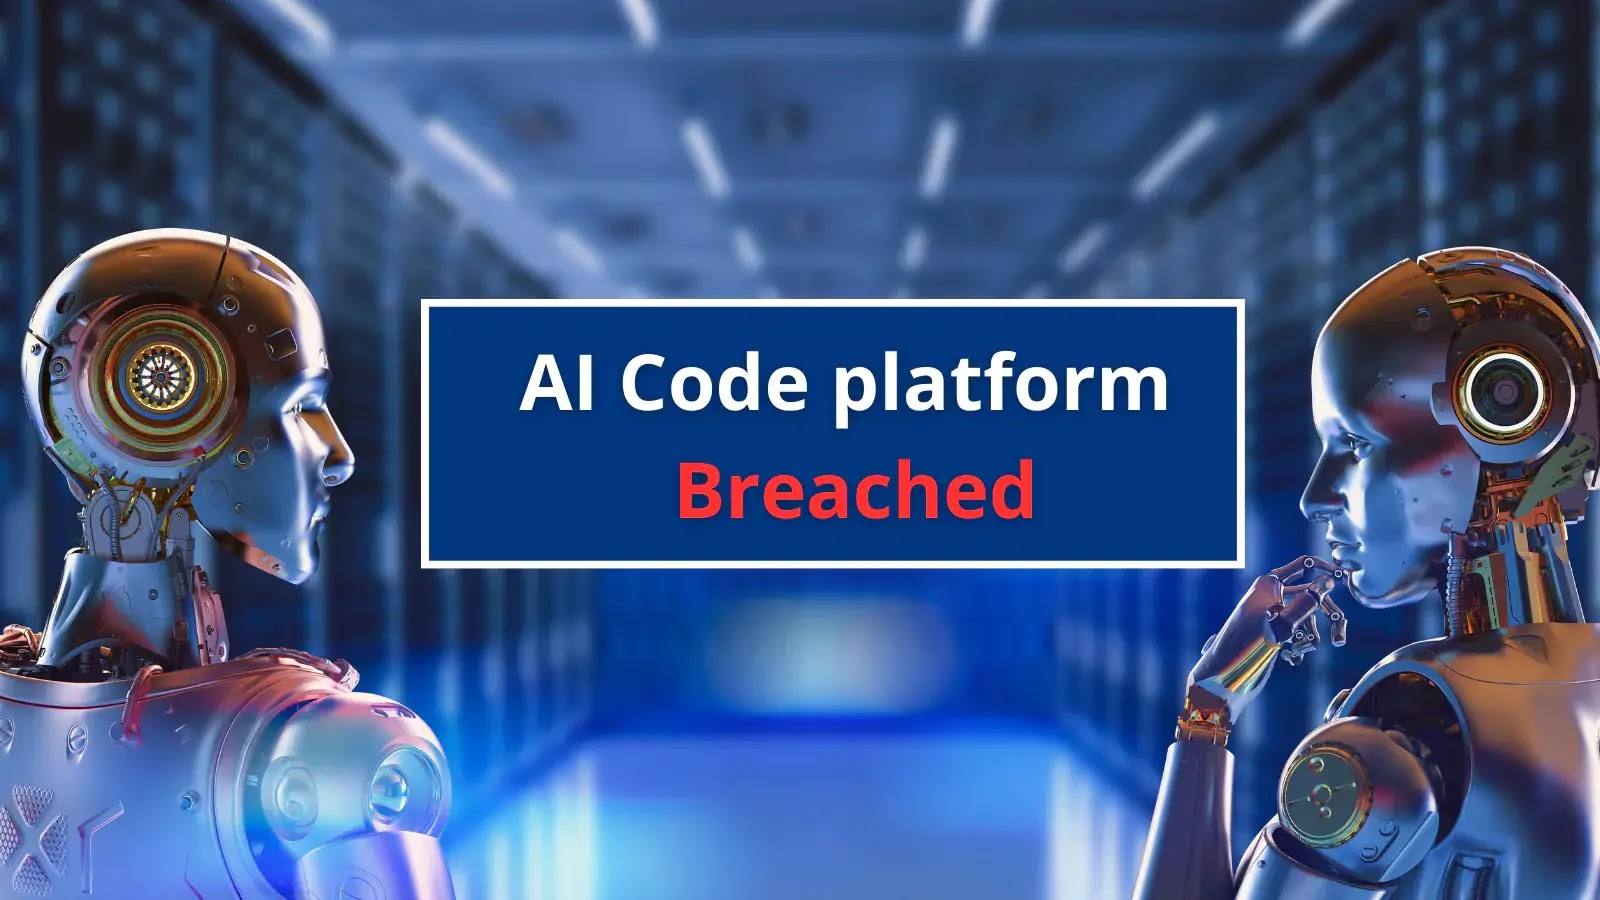 Attacker Gained Admin Access to AI Coding platform Sourcegraph Via Leaked Token